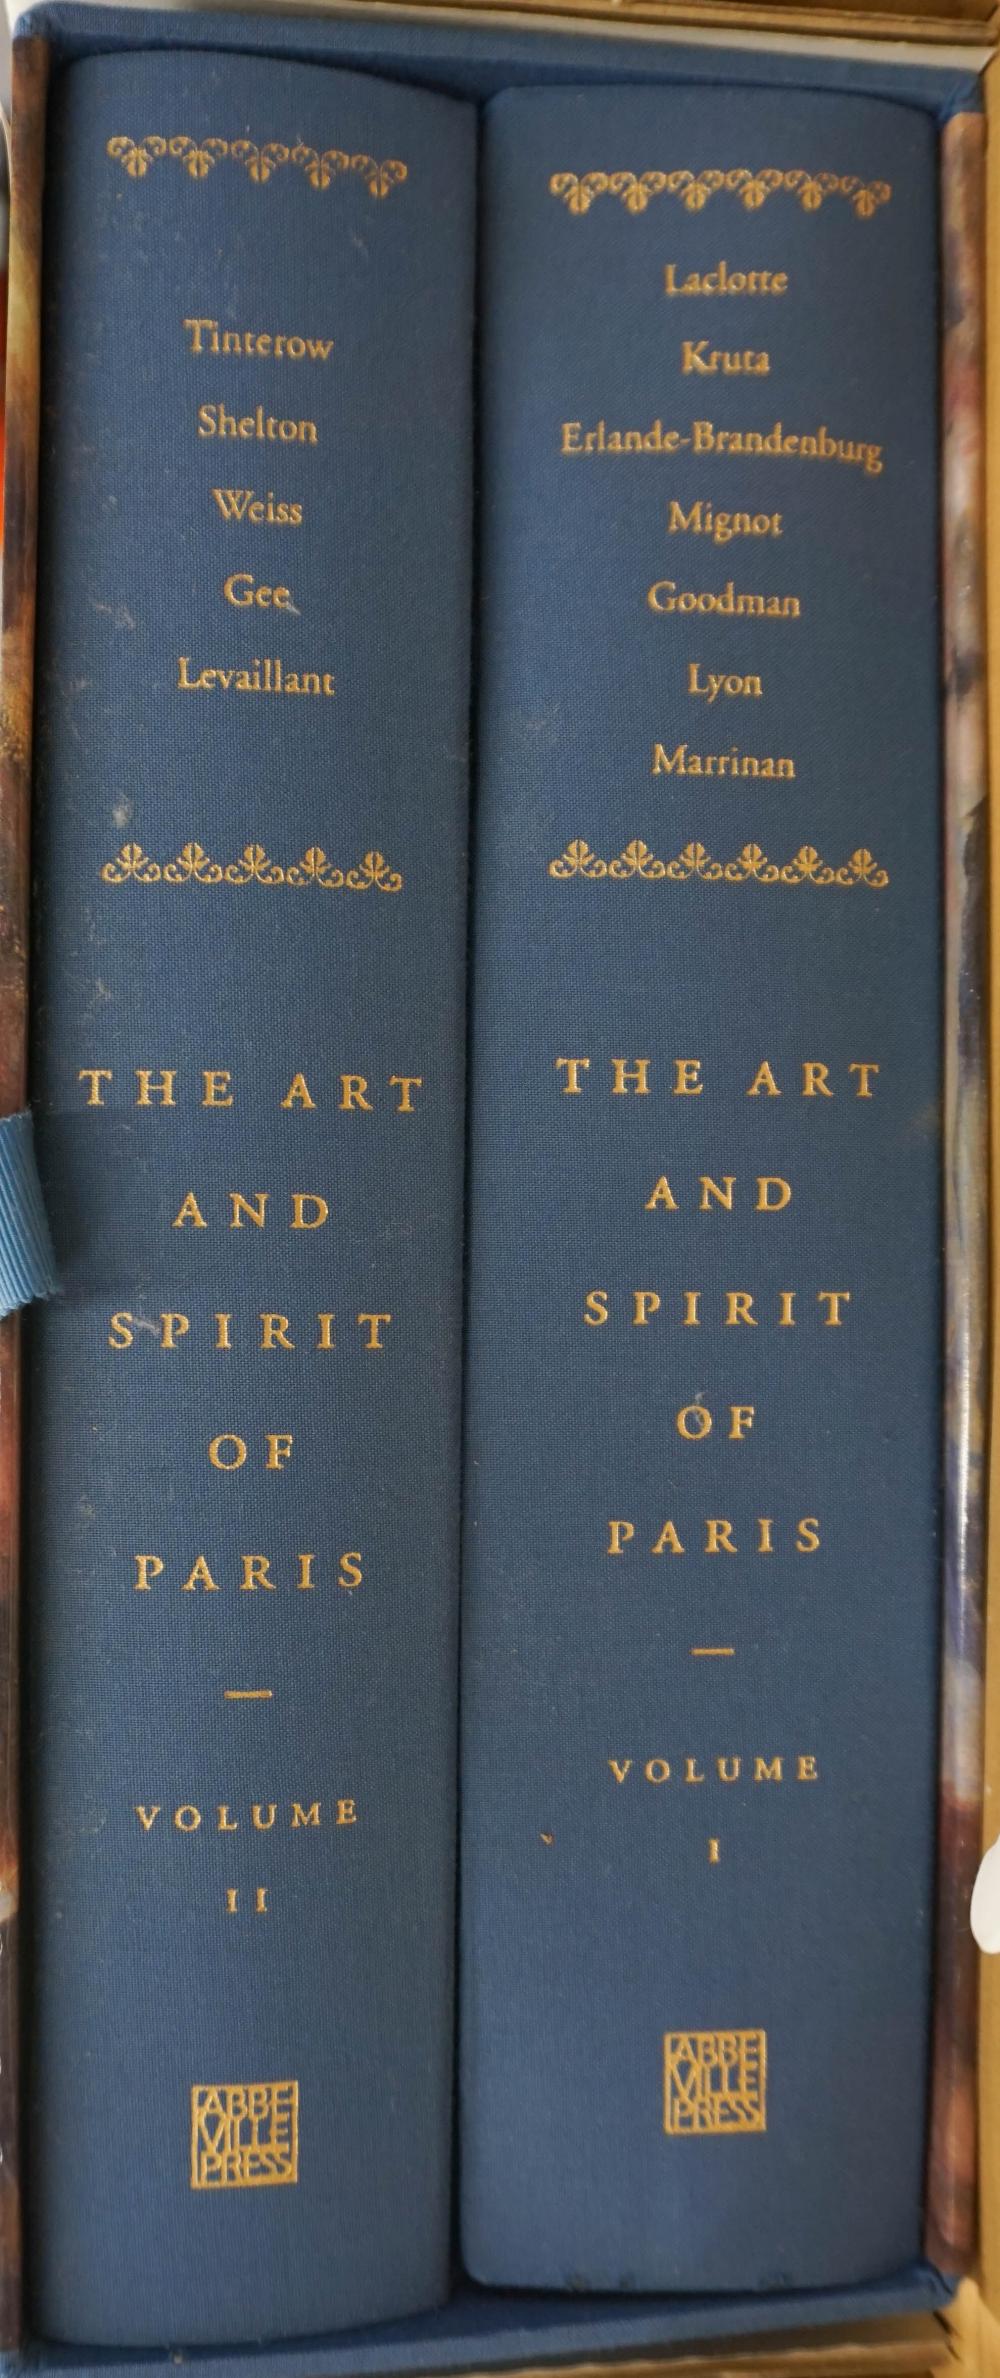 THE ART AND SPIRIT OF PARIS, TWO